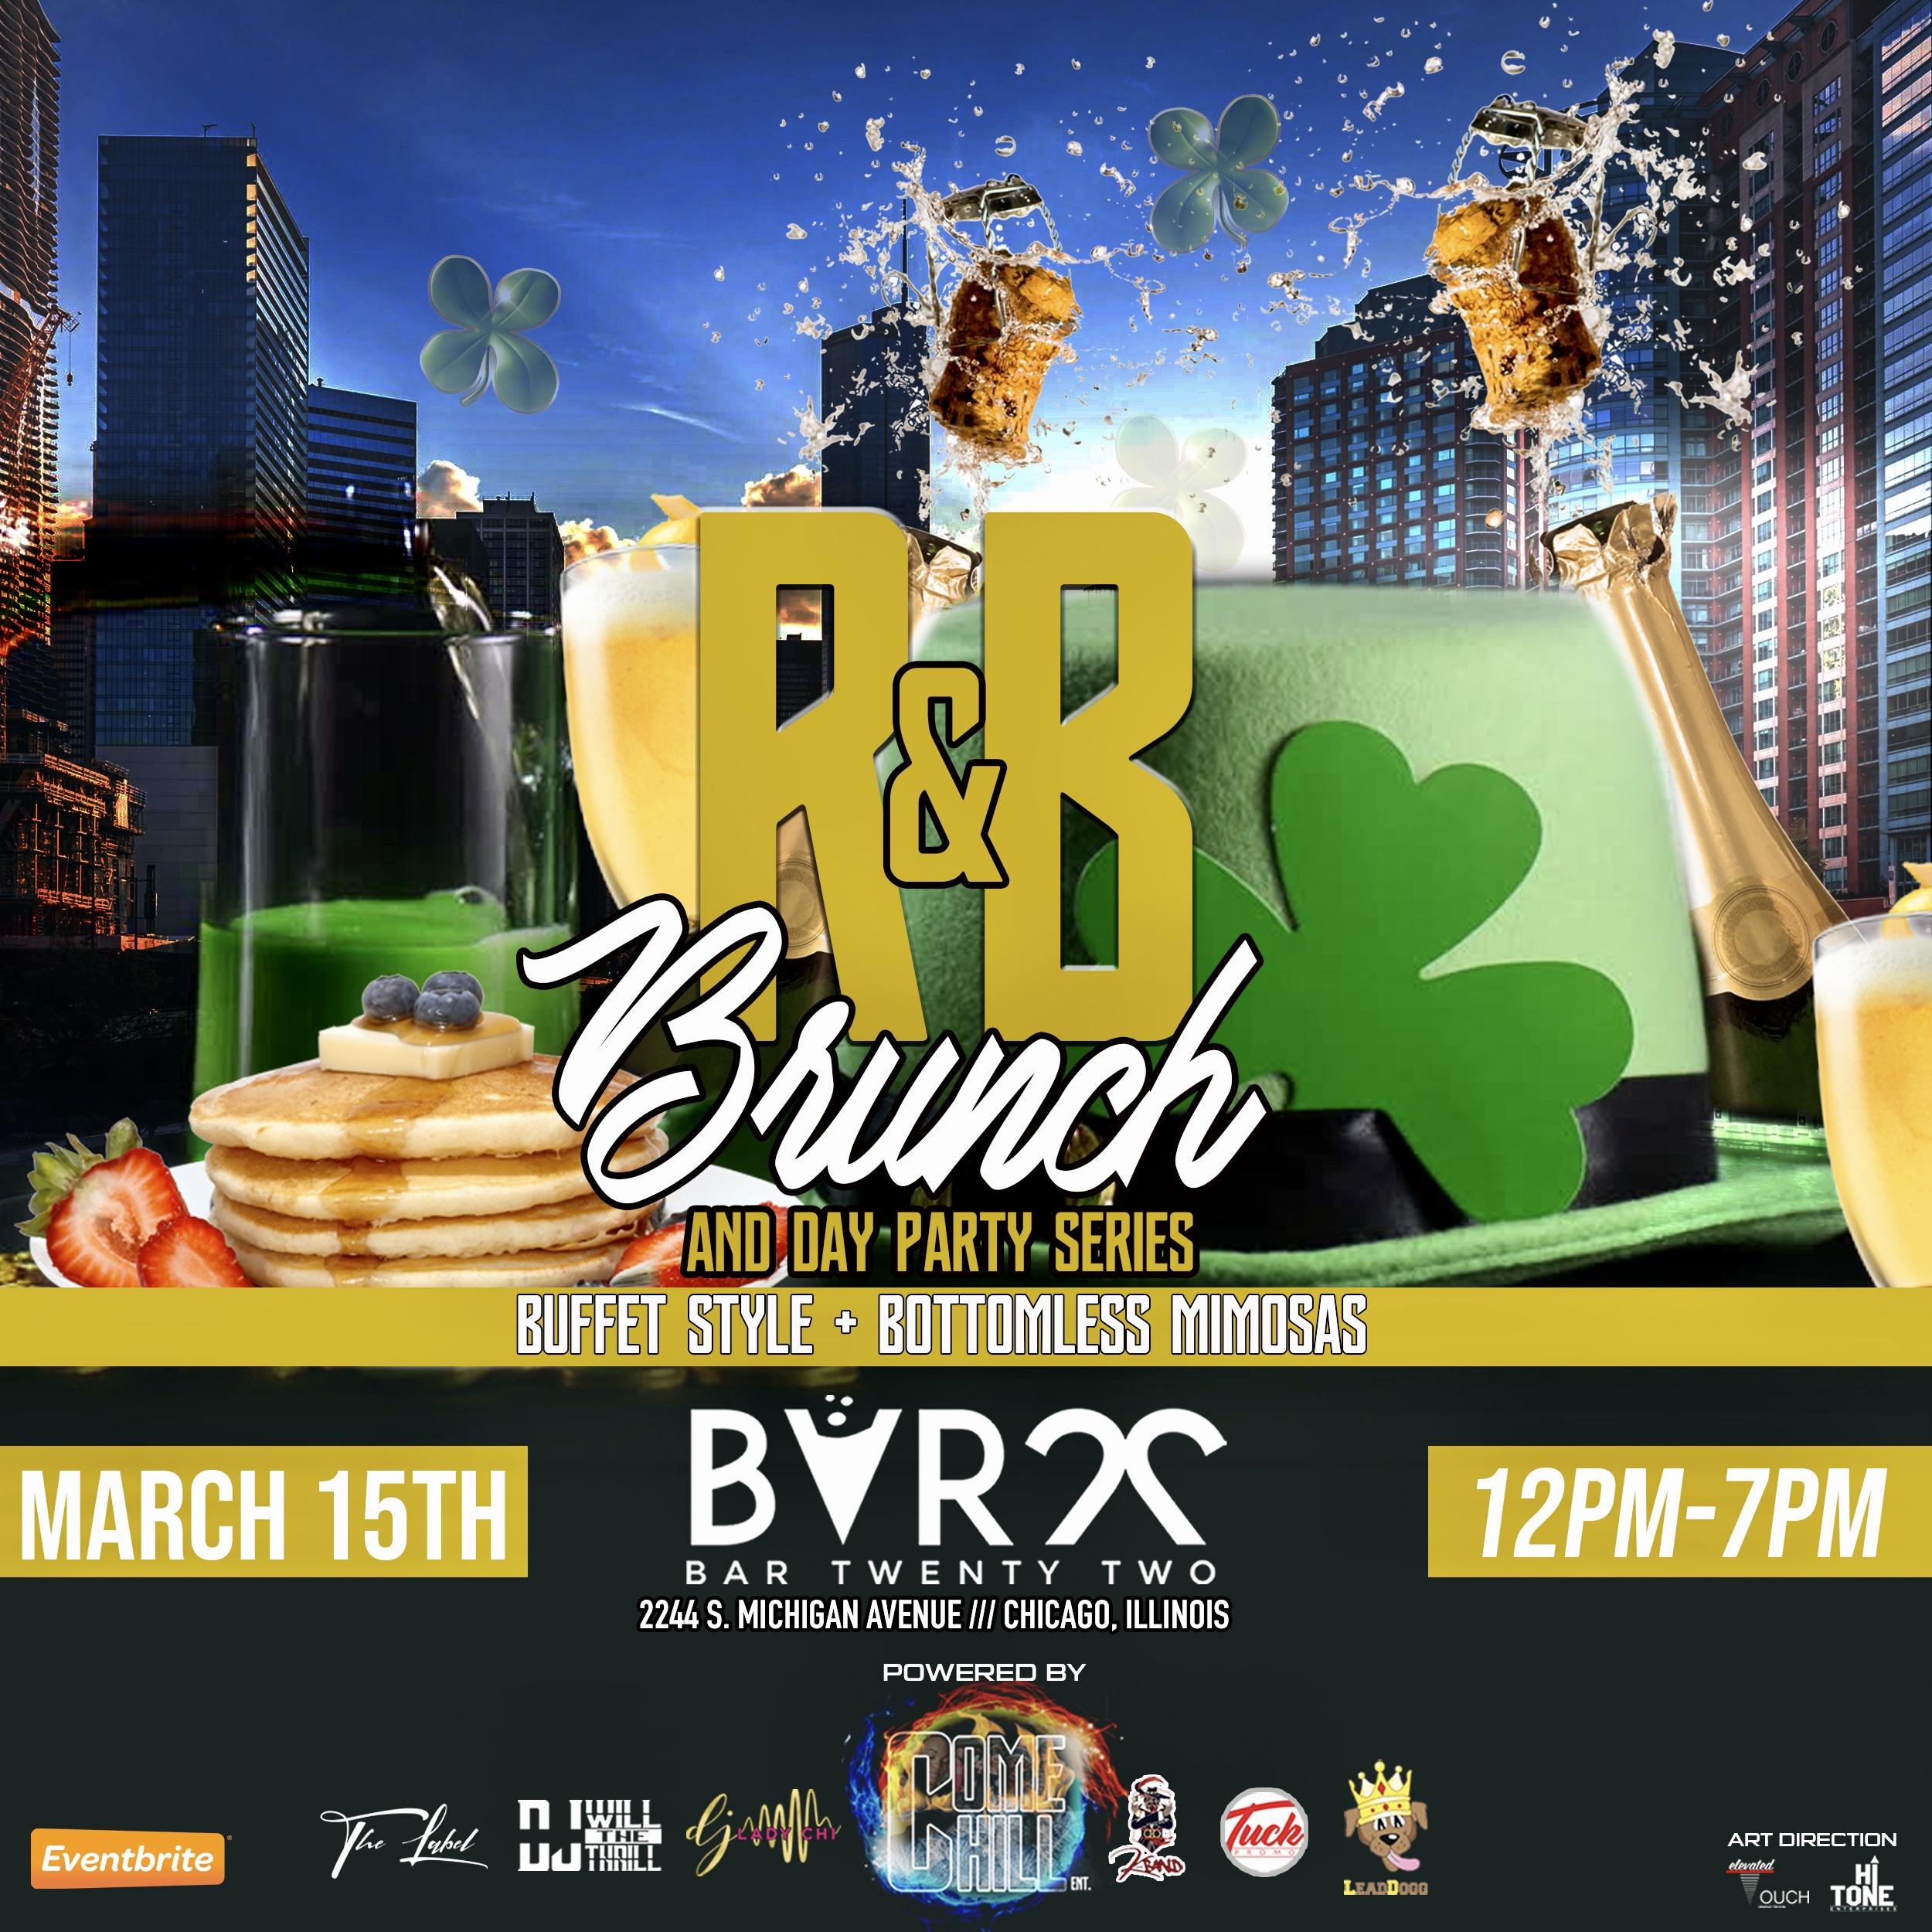 COME CHILL: R&B BRUNCH (DAY PARTY SERIES)